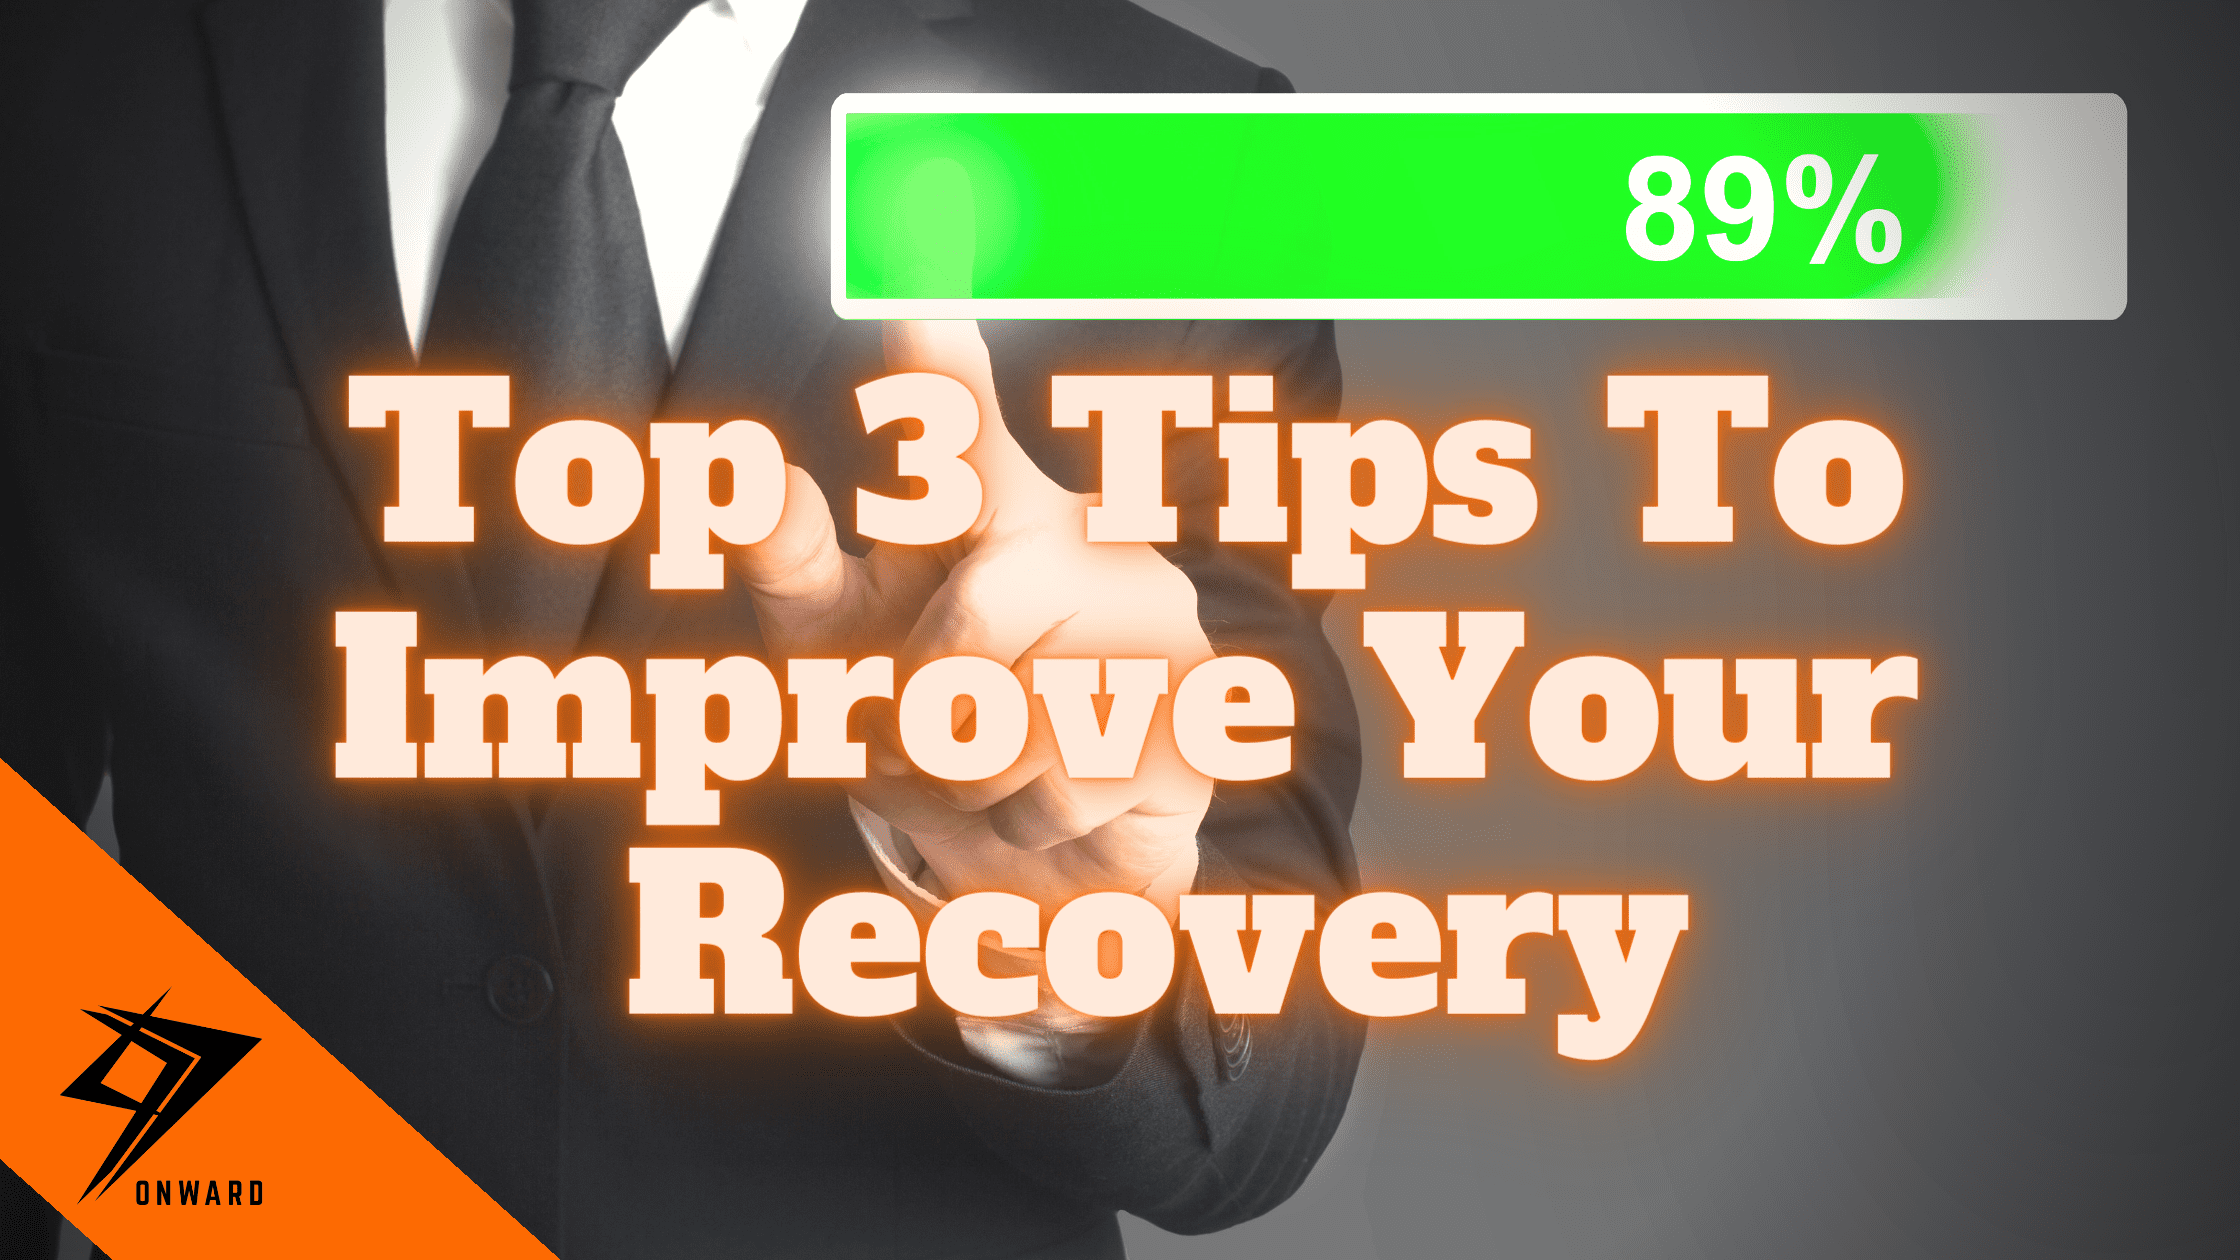 Featured image for “Top 3 Tips to Improve Your Recovery & Performance”